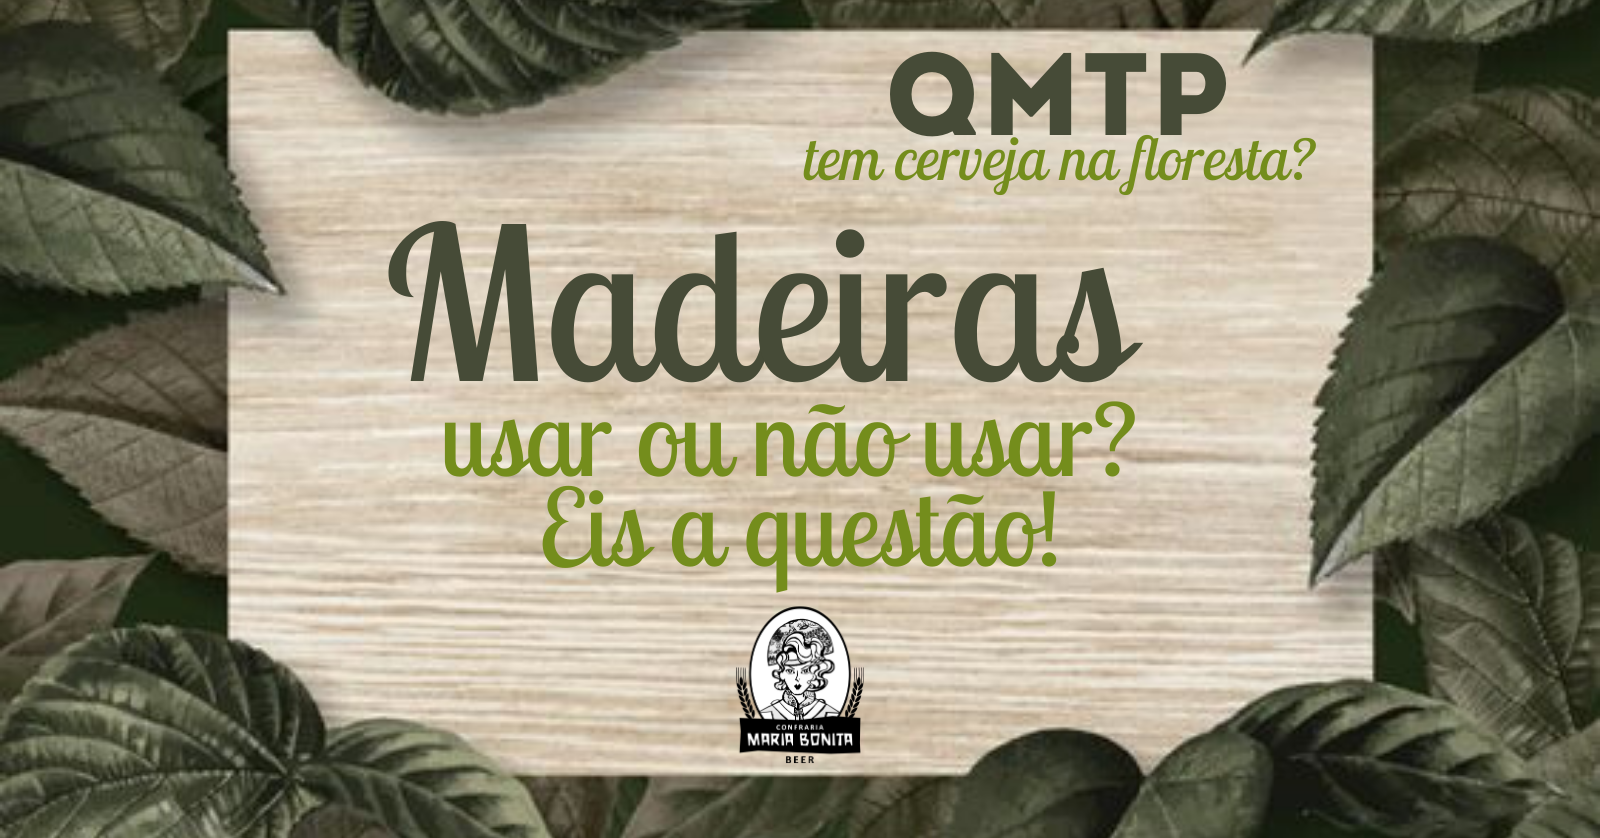 QMTP2020_Titulo3_Post_Blog.png